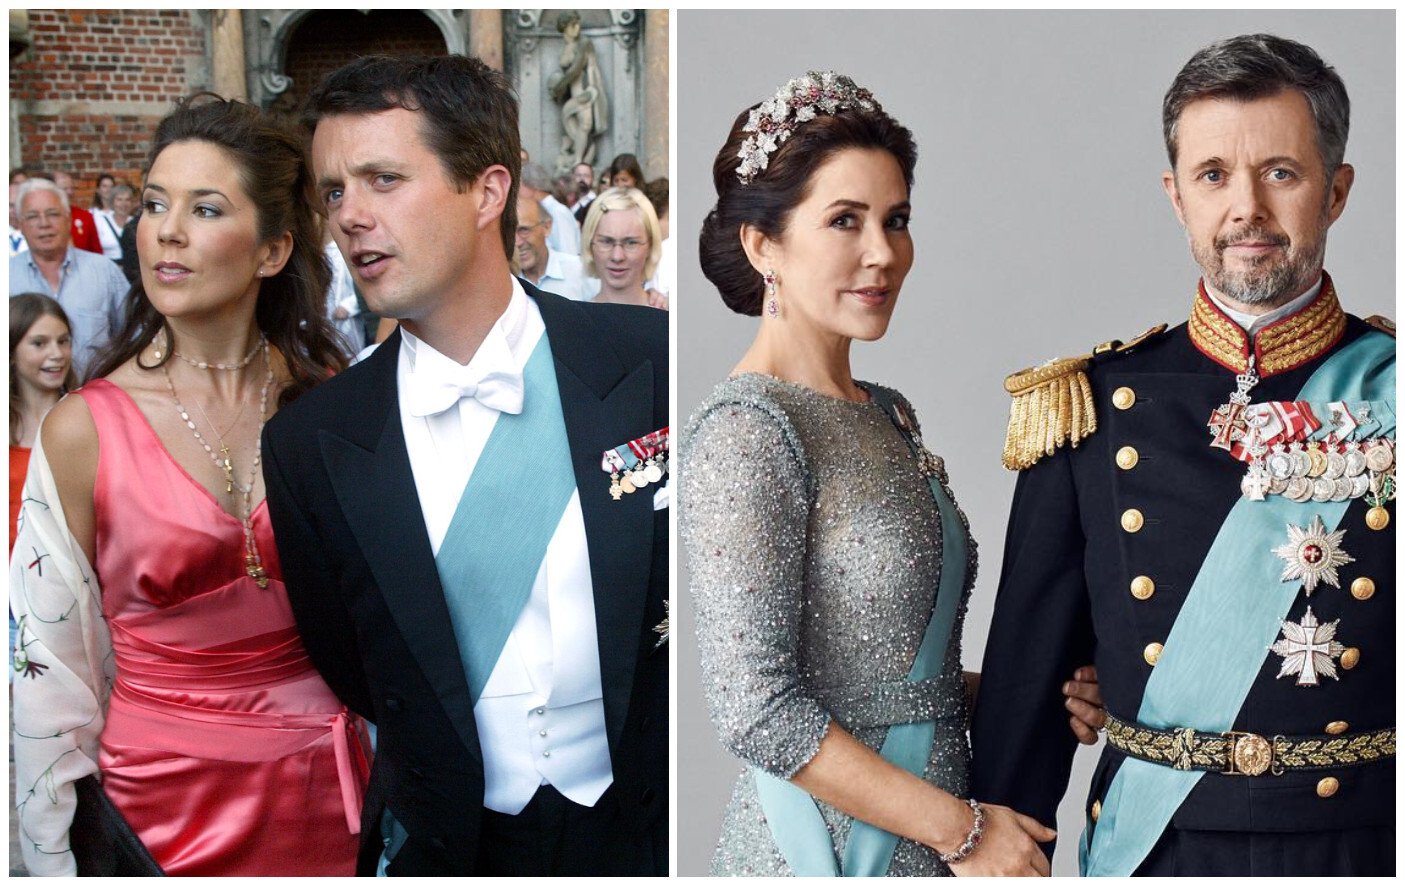 Learn more about Crown Prince Frederik and Crown Princess Mary of Denmark, who unexpectedly first met at a bar in Sydney ...  Photos: AP, @detdanskekongehus/Instagram